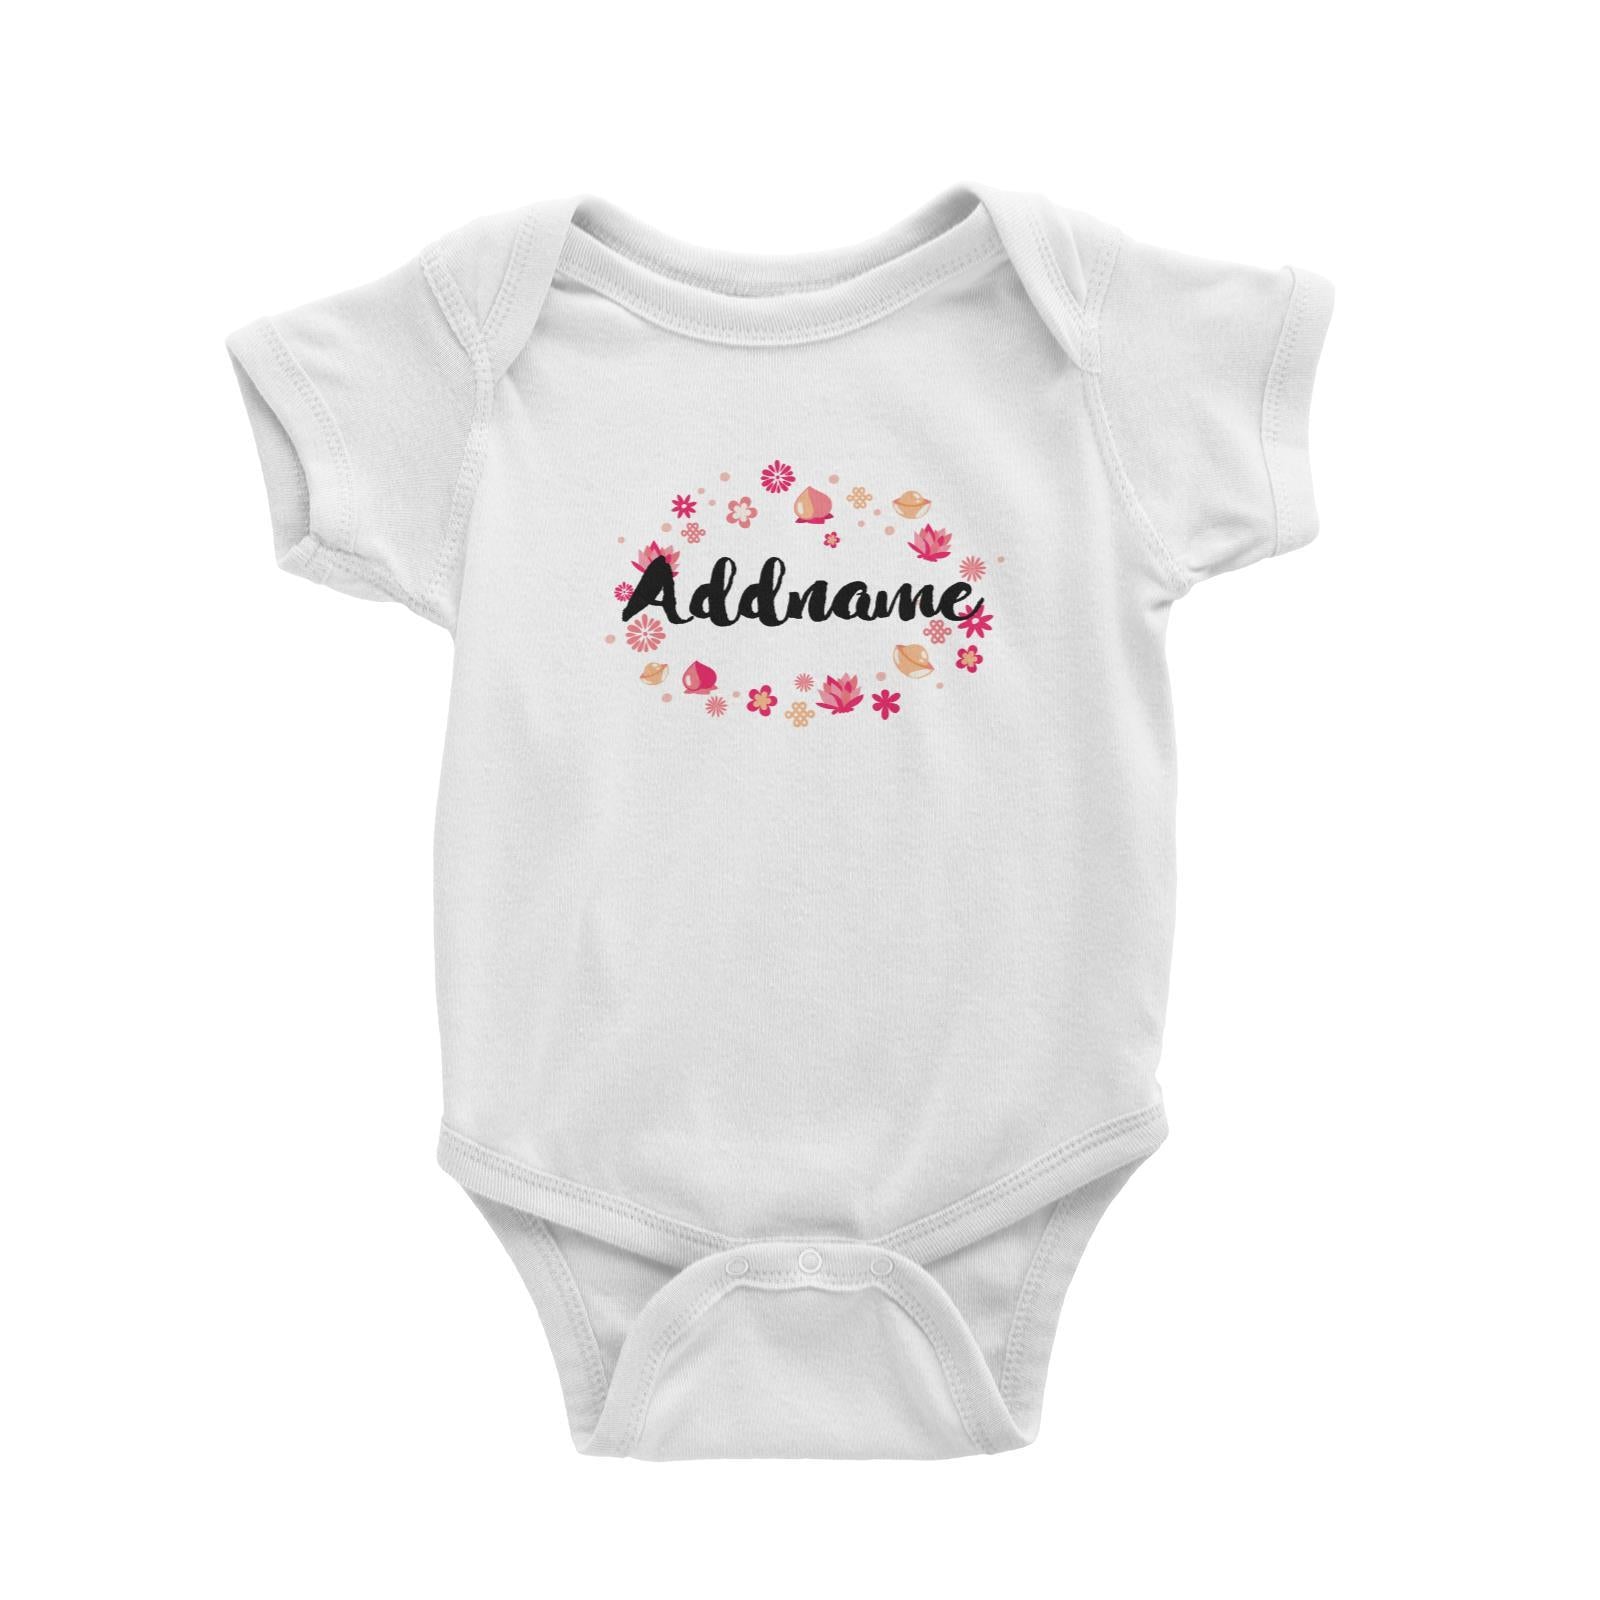 Chinese New Year Addname with Chinese New Year Elements Baby Romper Personalizable Designs CNY Elements